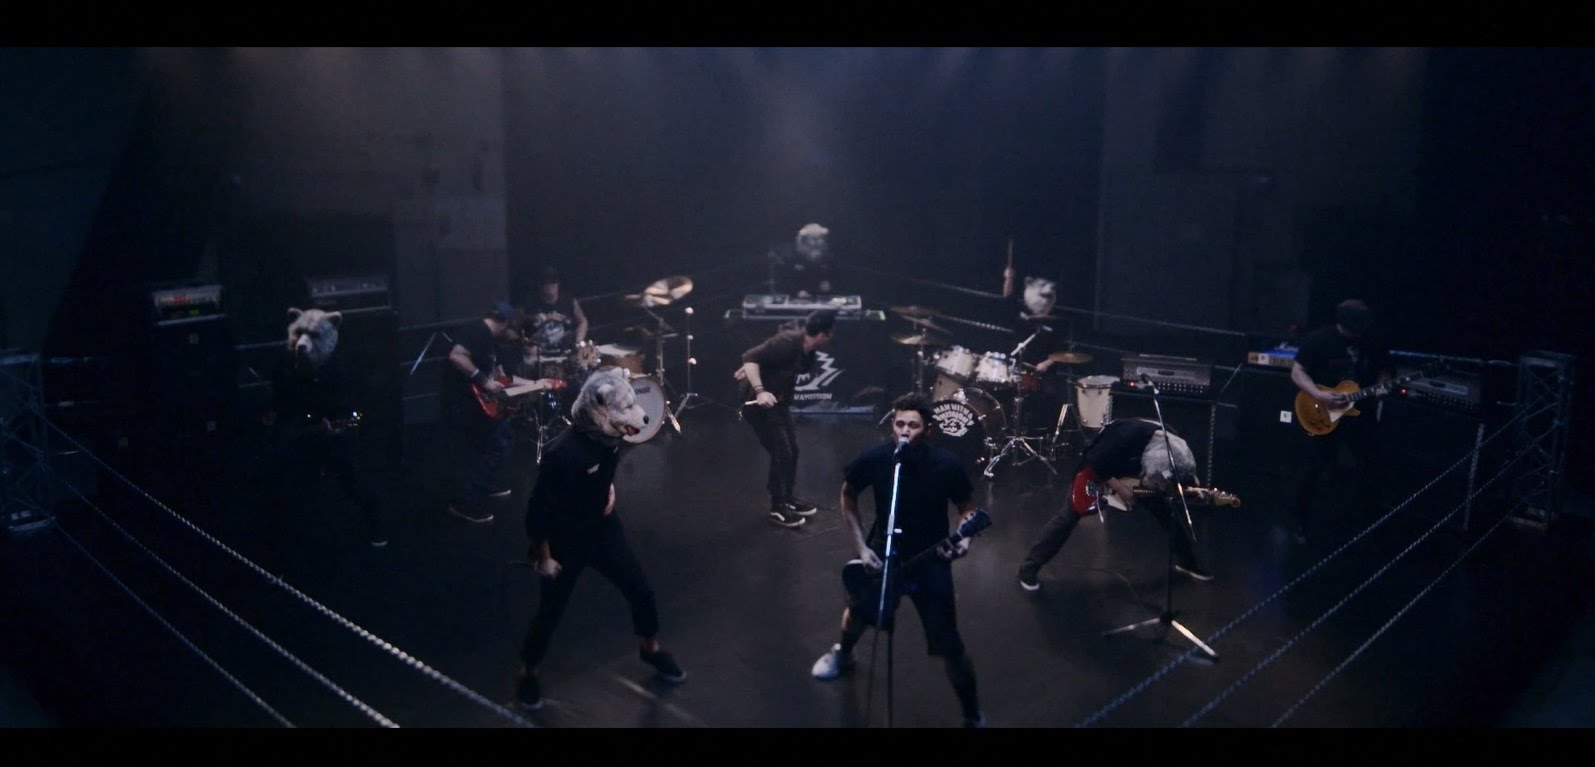 Man with a Mission x Zebrahead “Out of Control” musik video